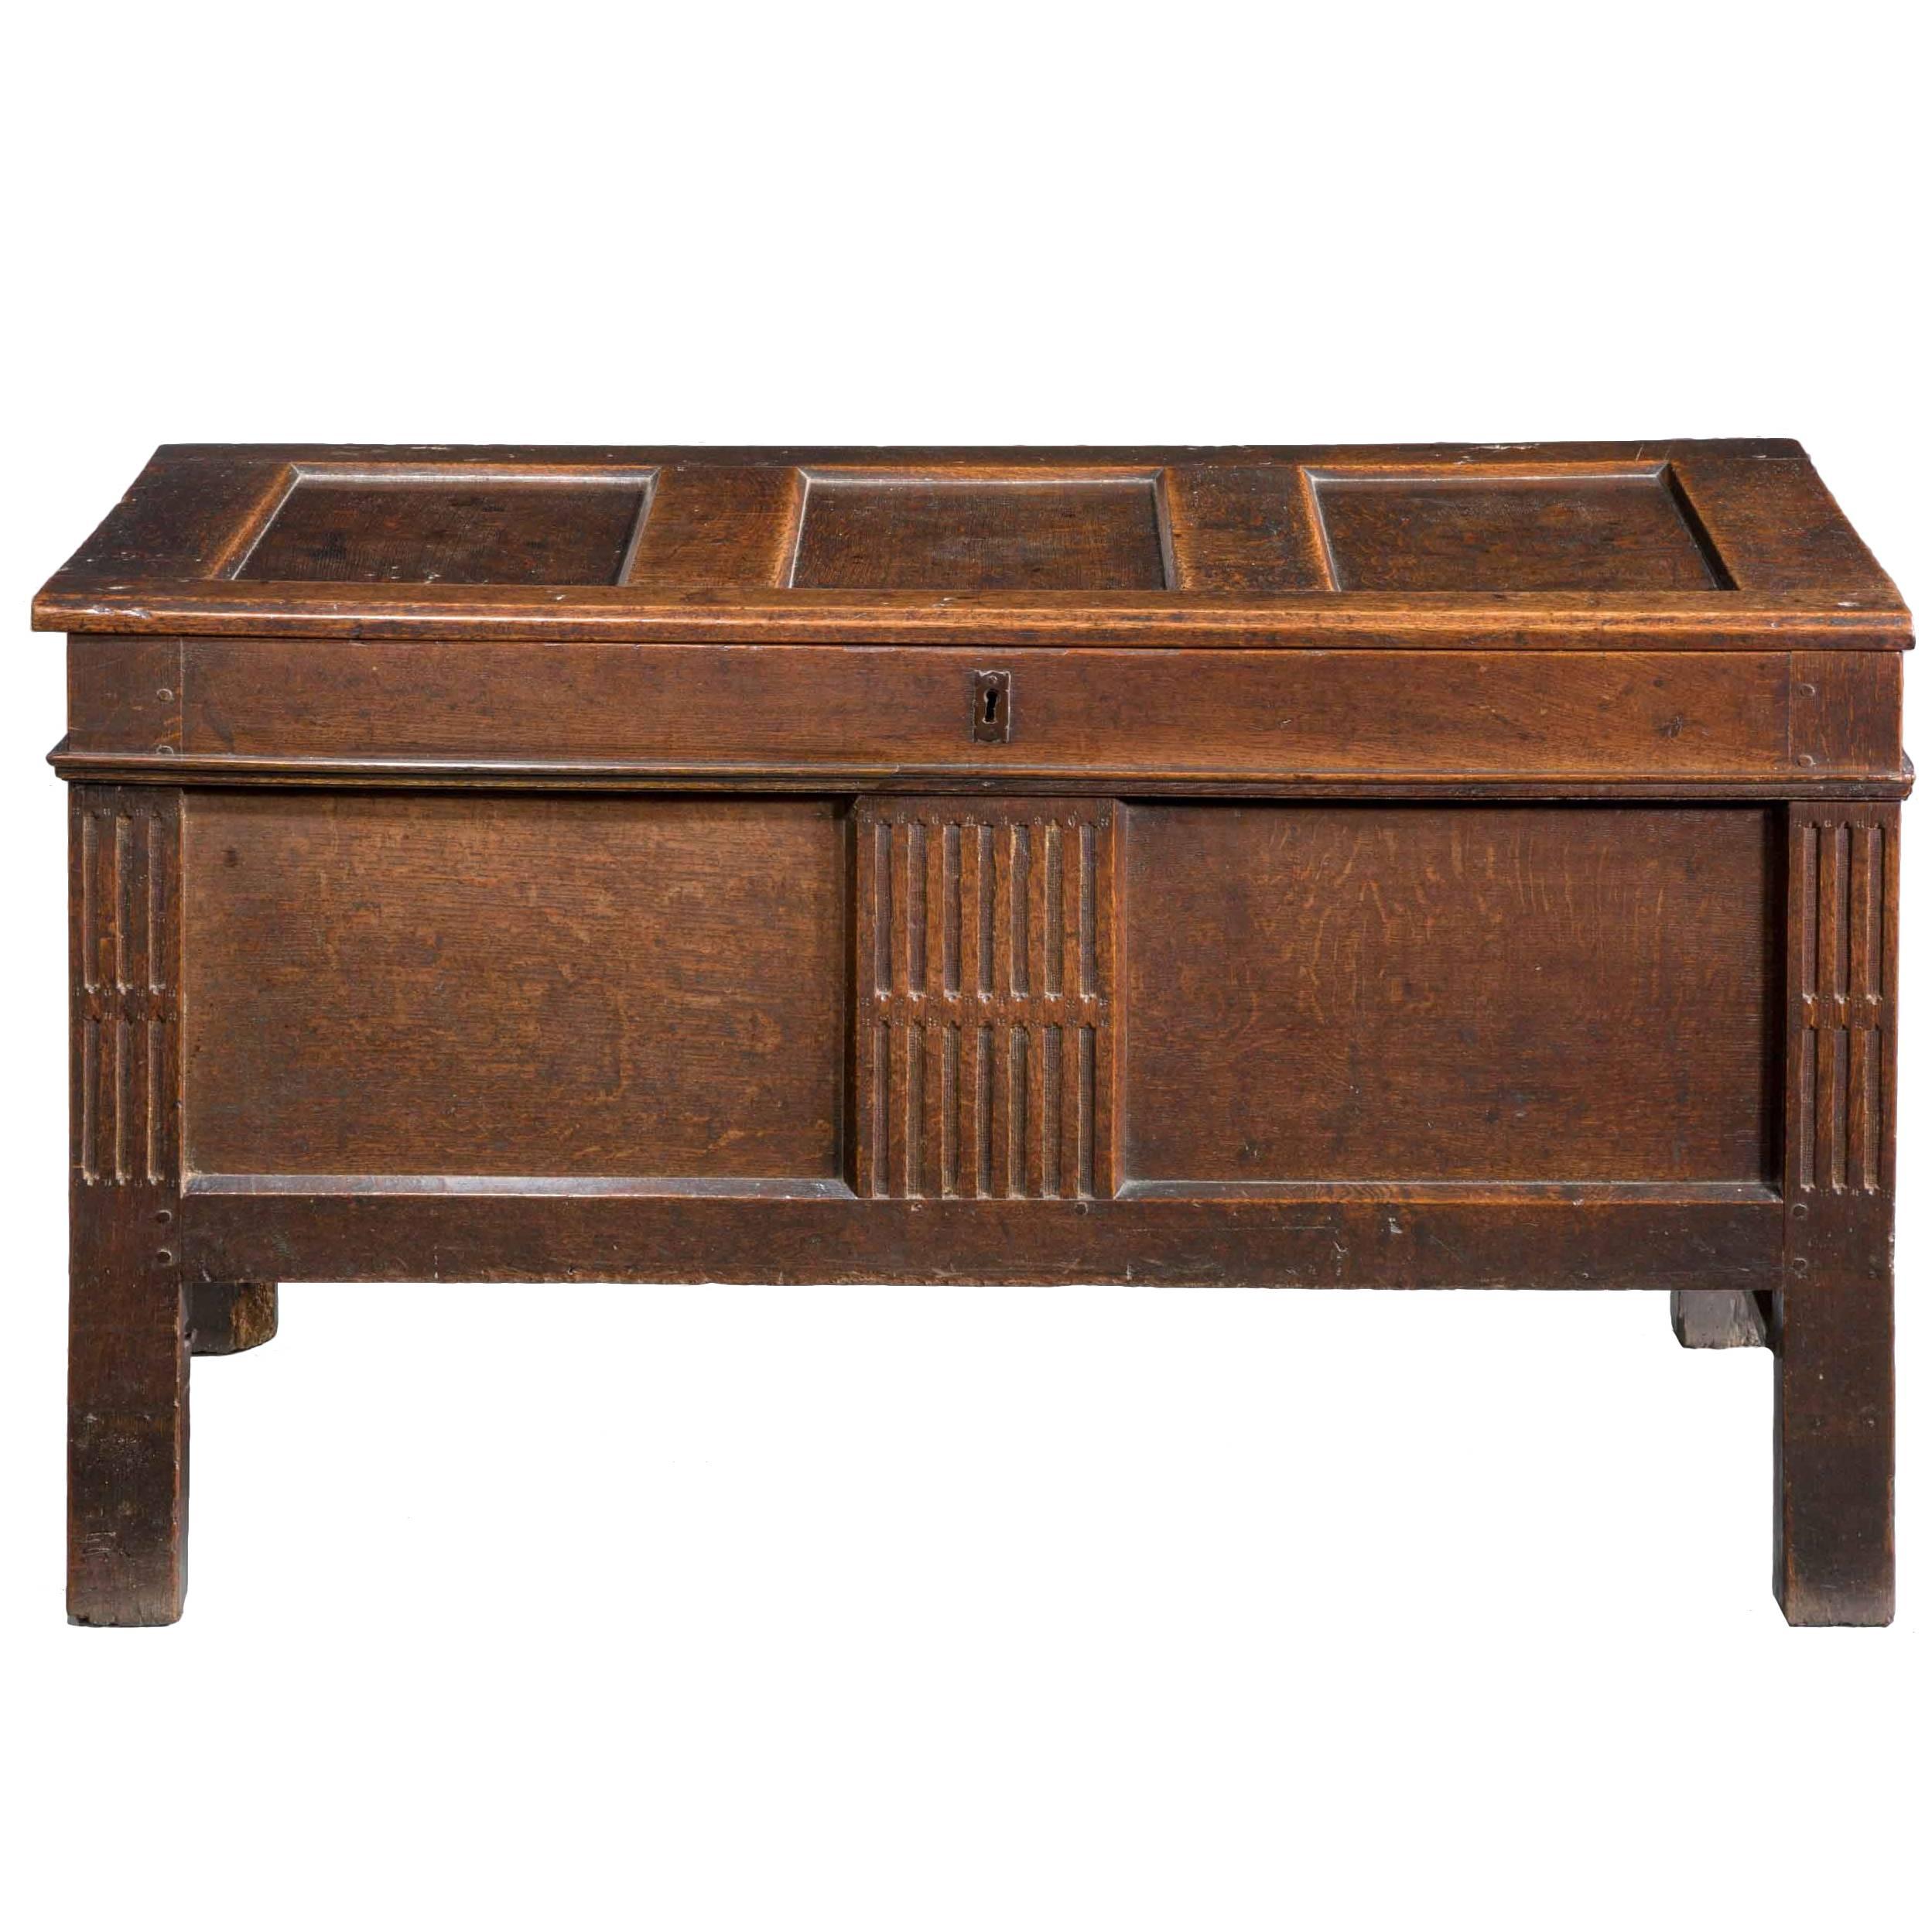 Early 18th Century Panelled Kist Coffer